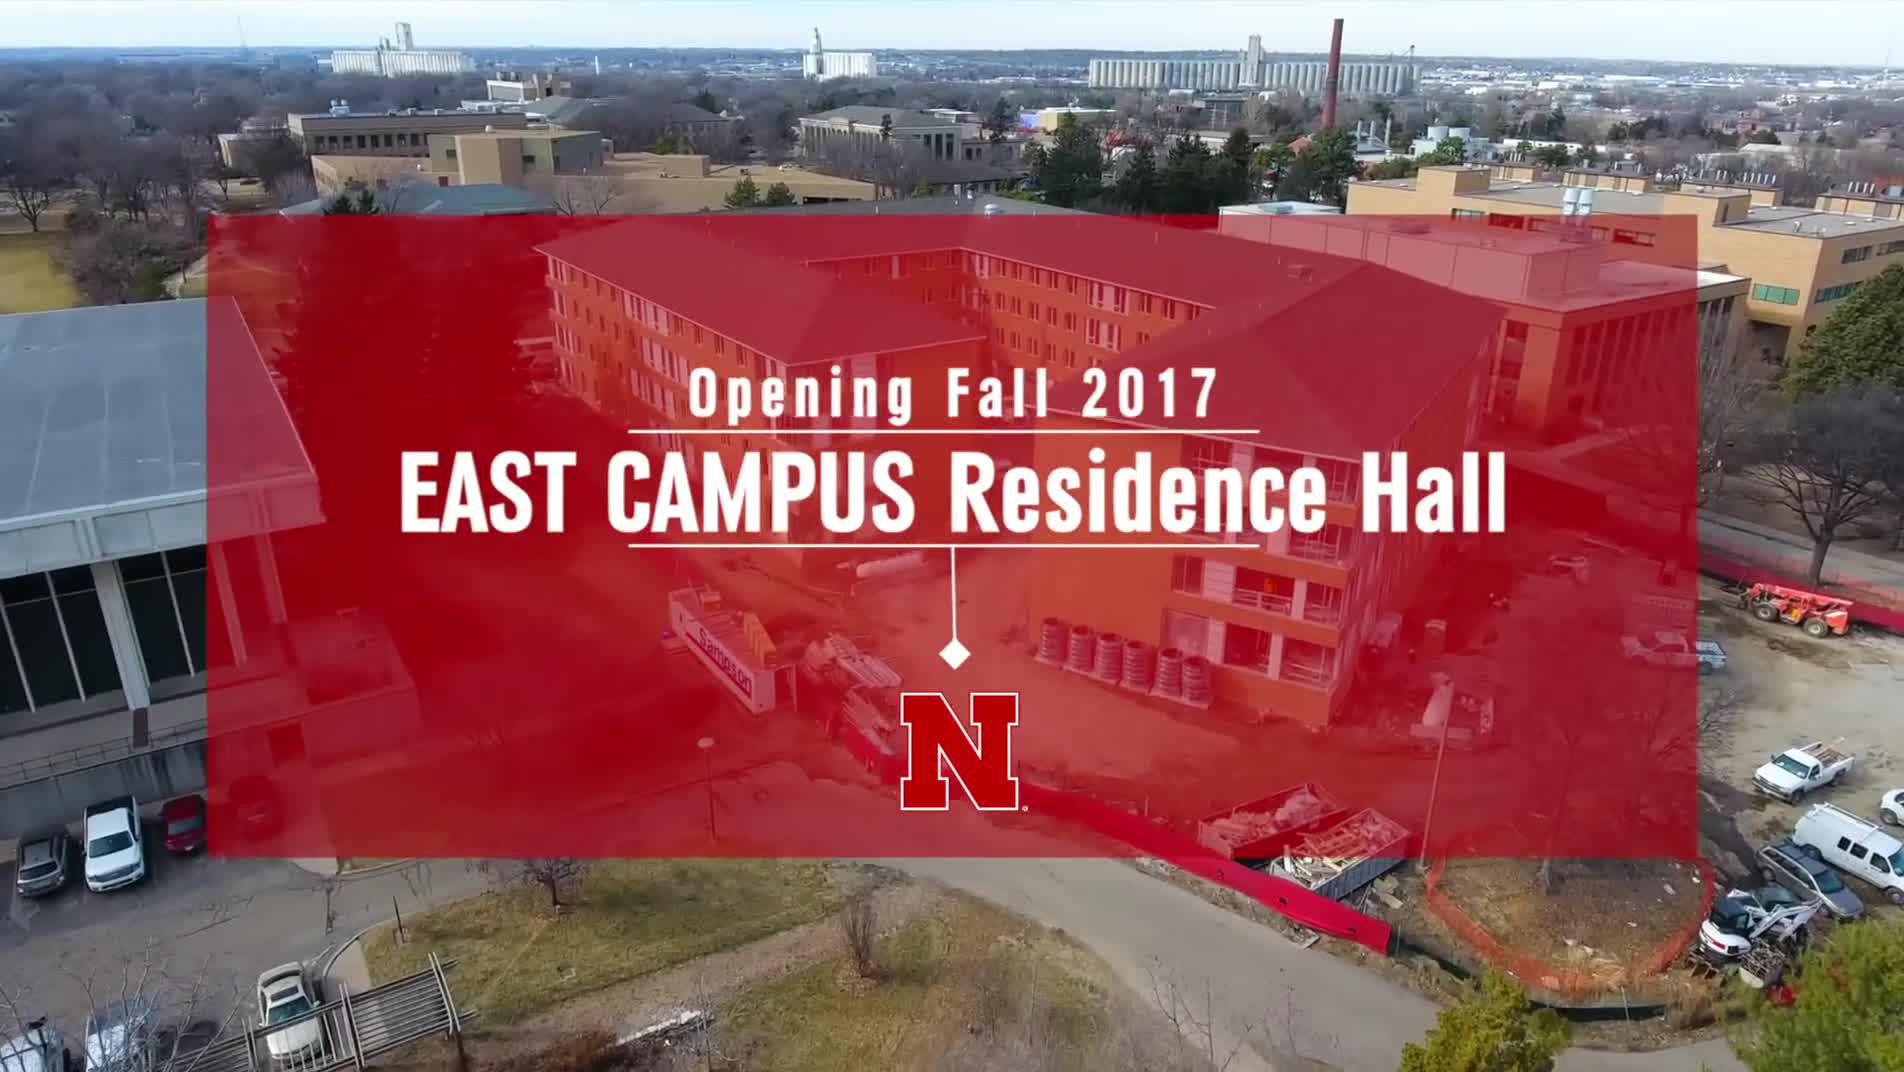 New for 2017: Massengale Hall